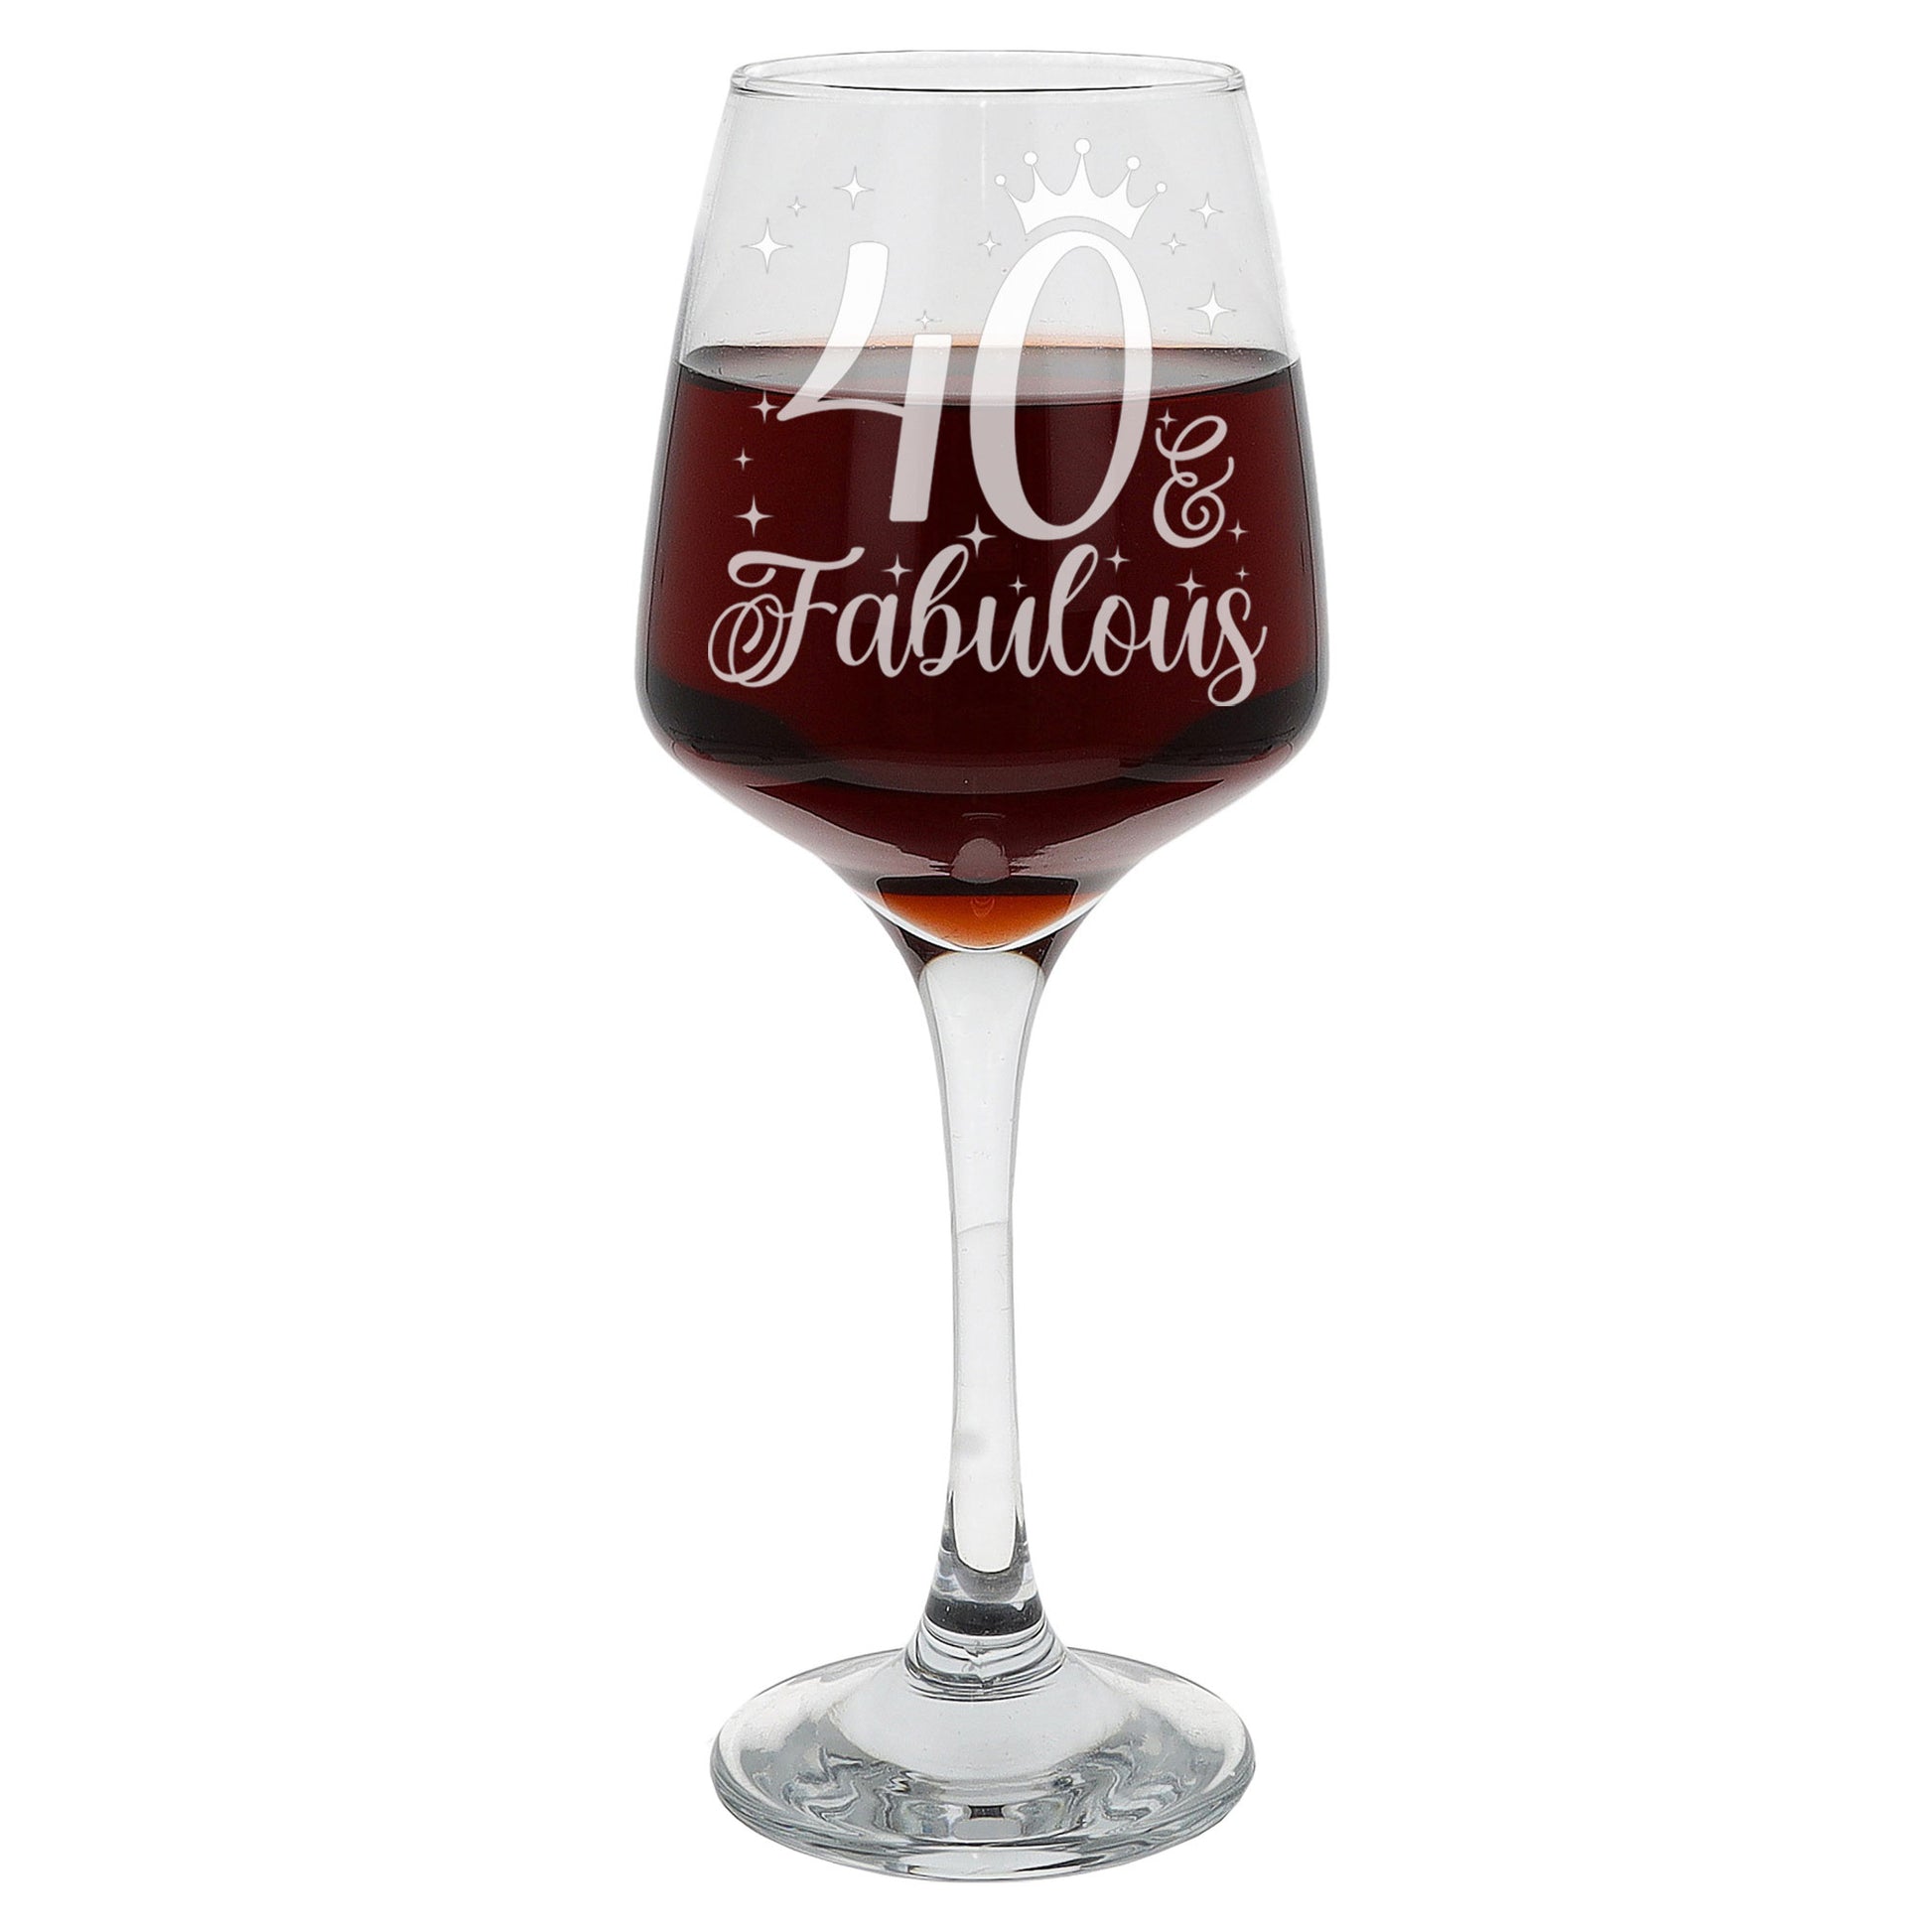 40 & Fabulous 40th Birthday Gift Engraved Wine Glass and/or Coaster Set  - Always Looking Good -   